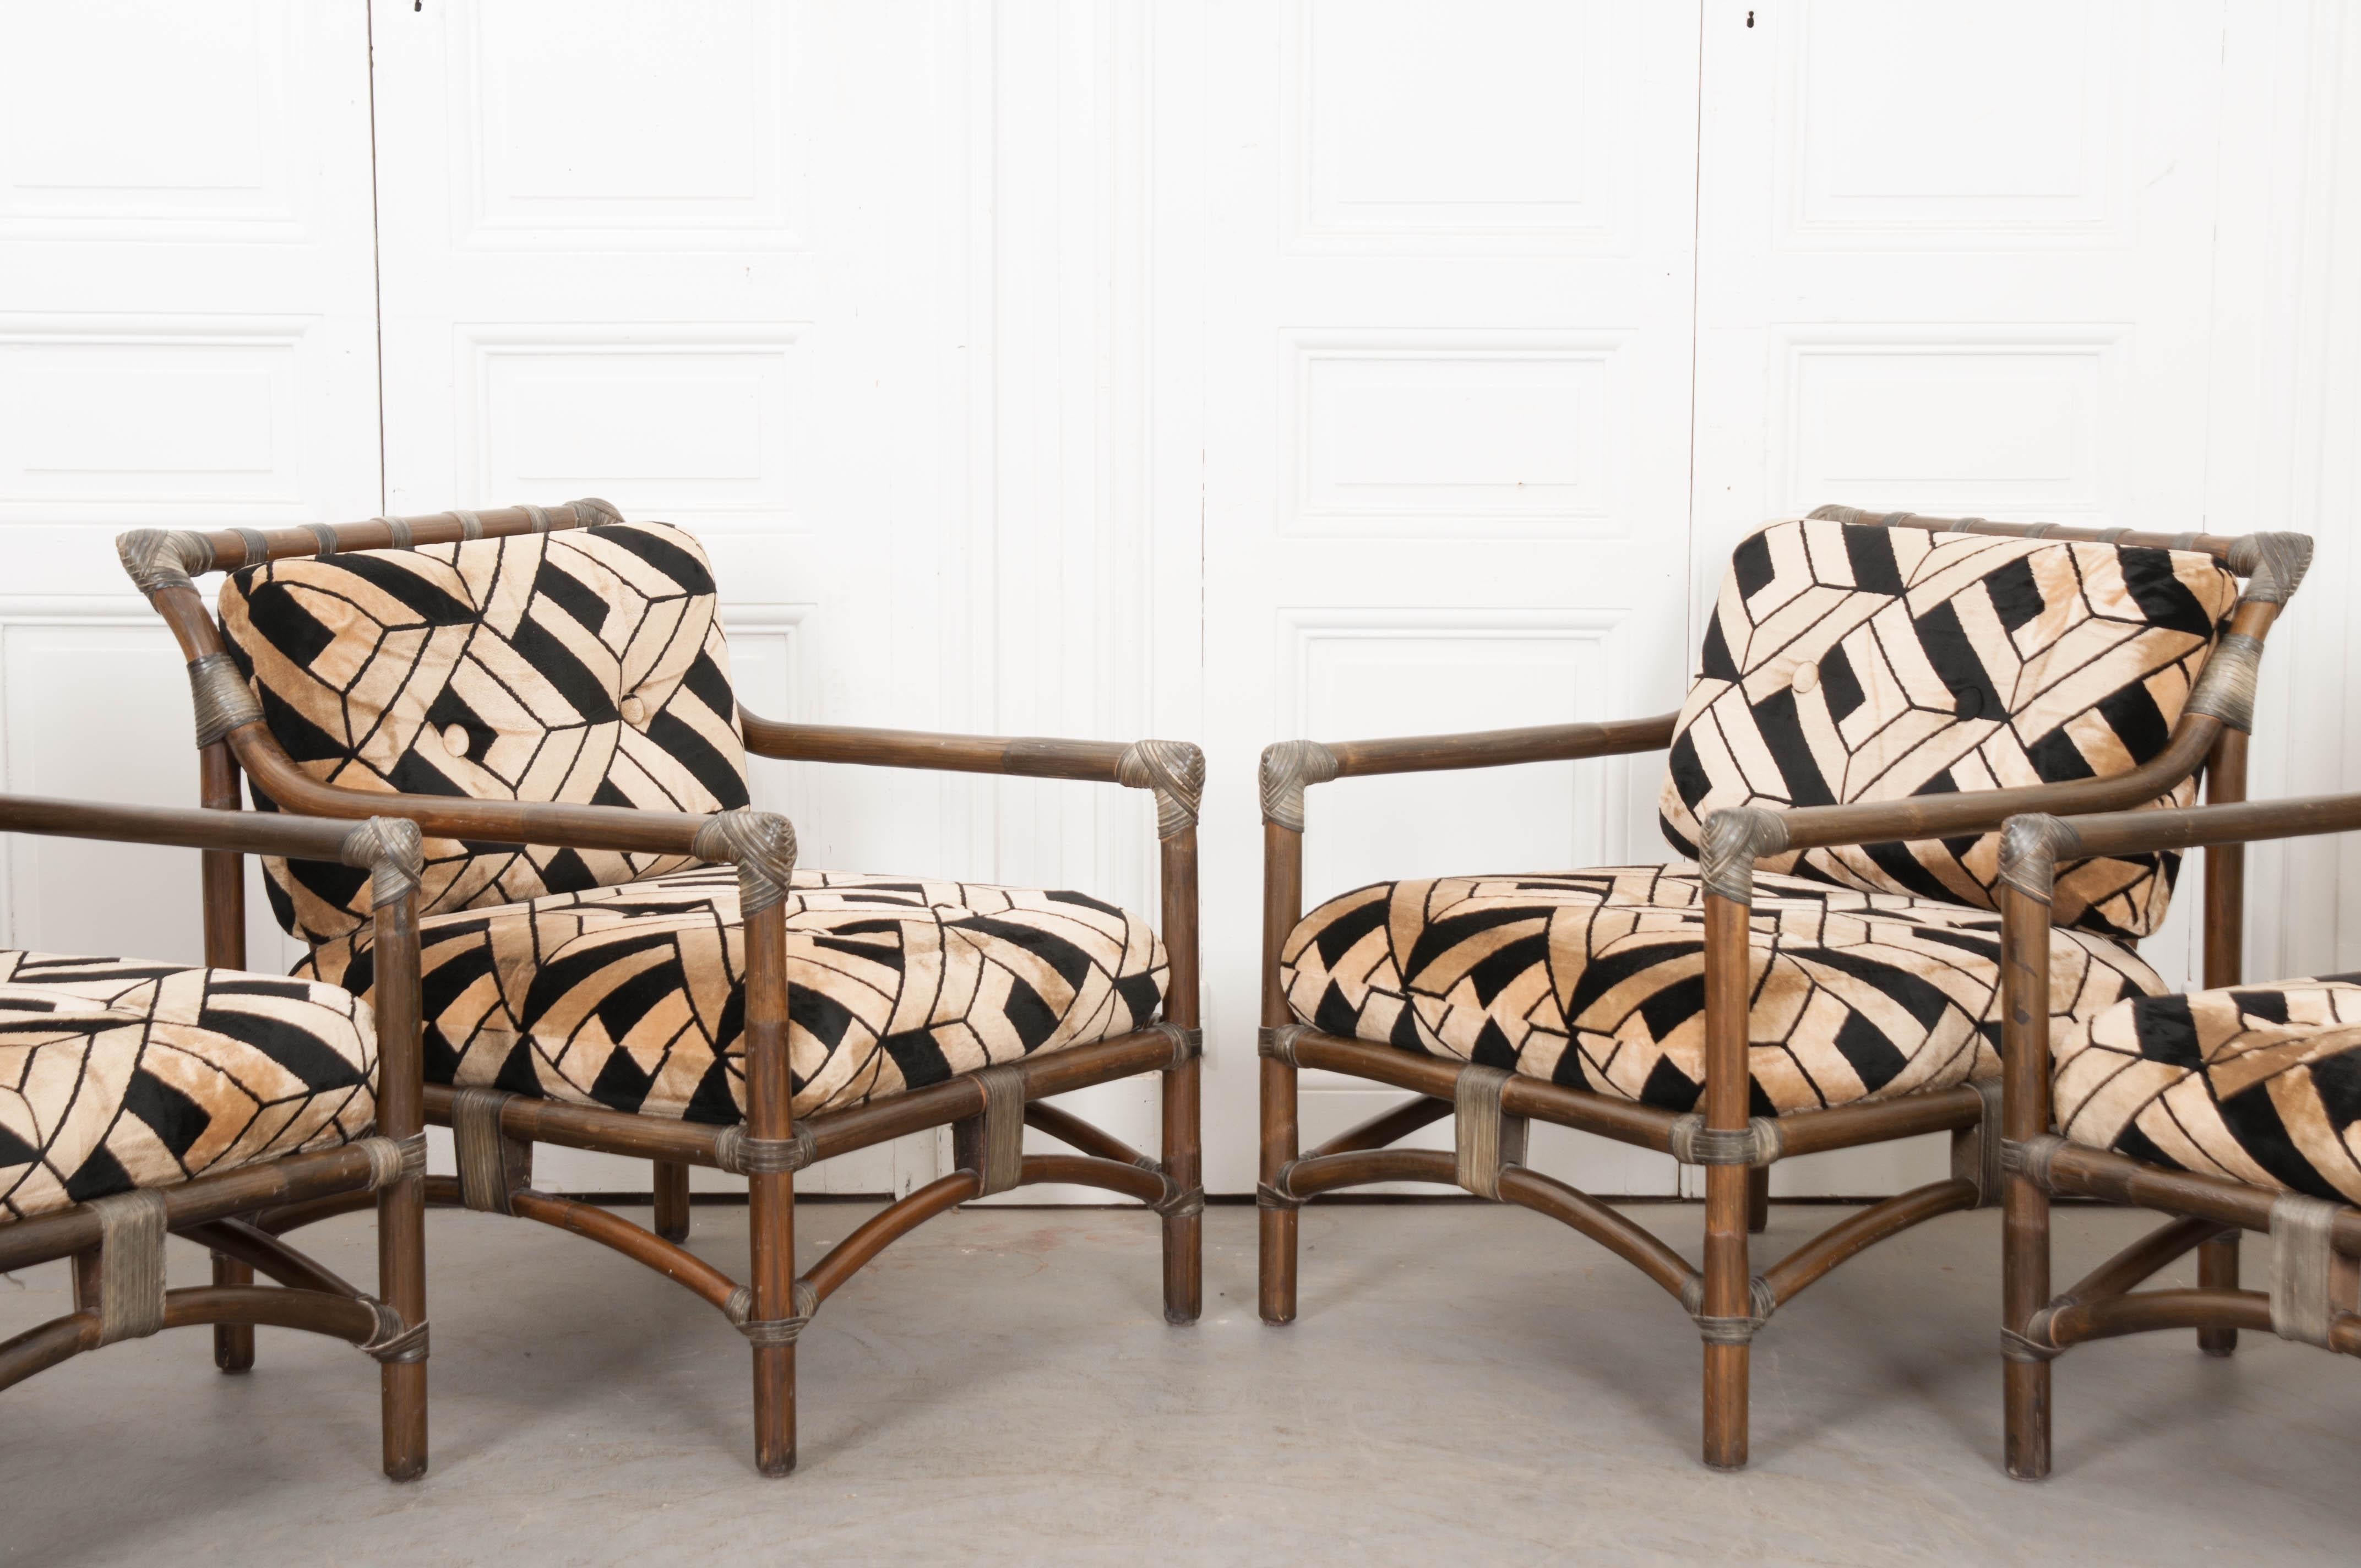 Late 20th Century Set of Four French Mid-Century Modern Rattan Armchairs